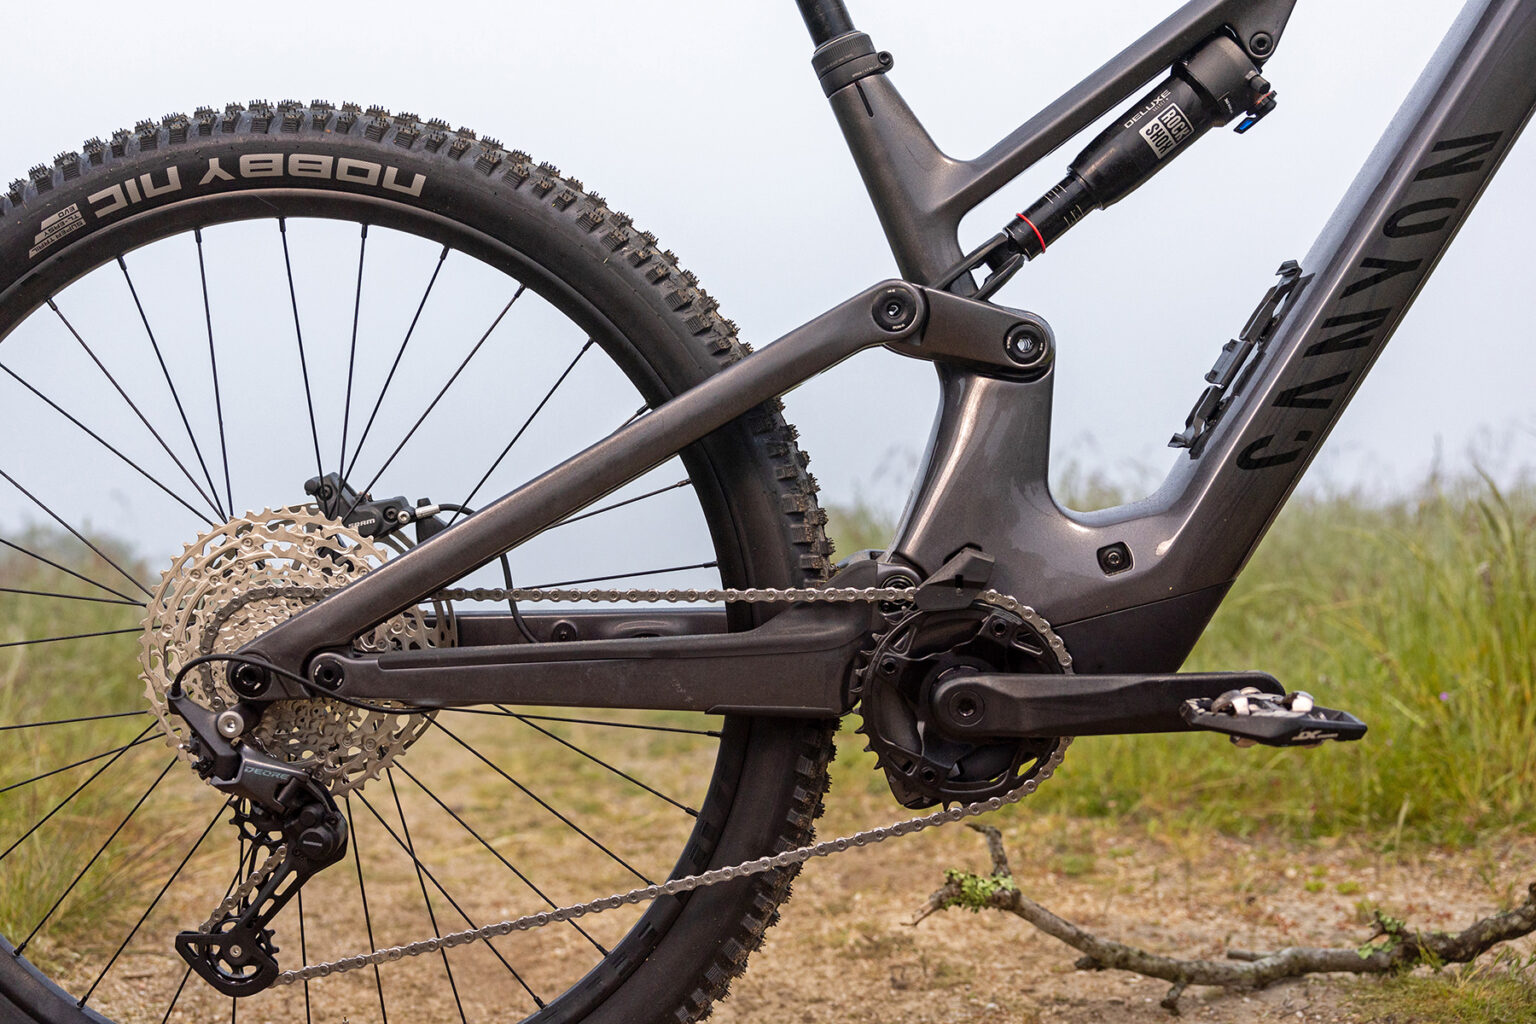 Canyon Neuron:ONfly lightweight 140mm carbon trail ebike with Bosch SX motor, rear triangle drivetrain detail